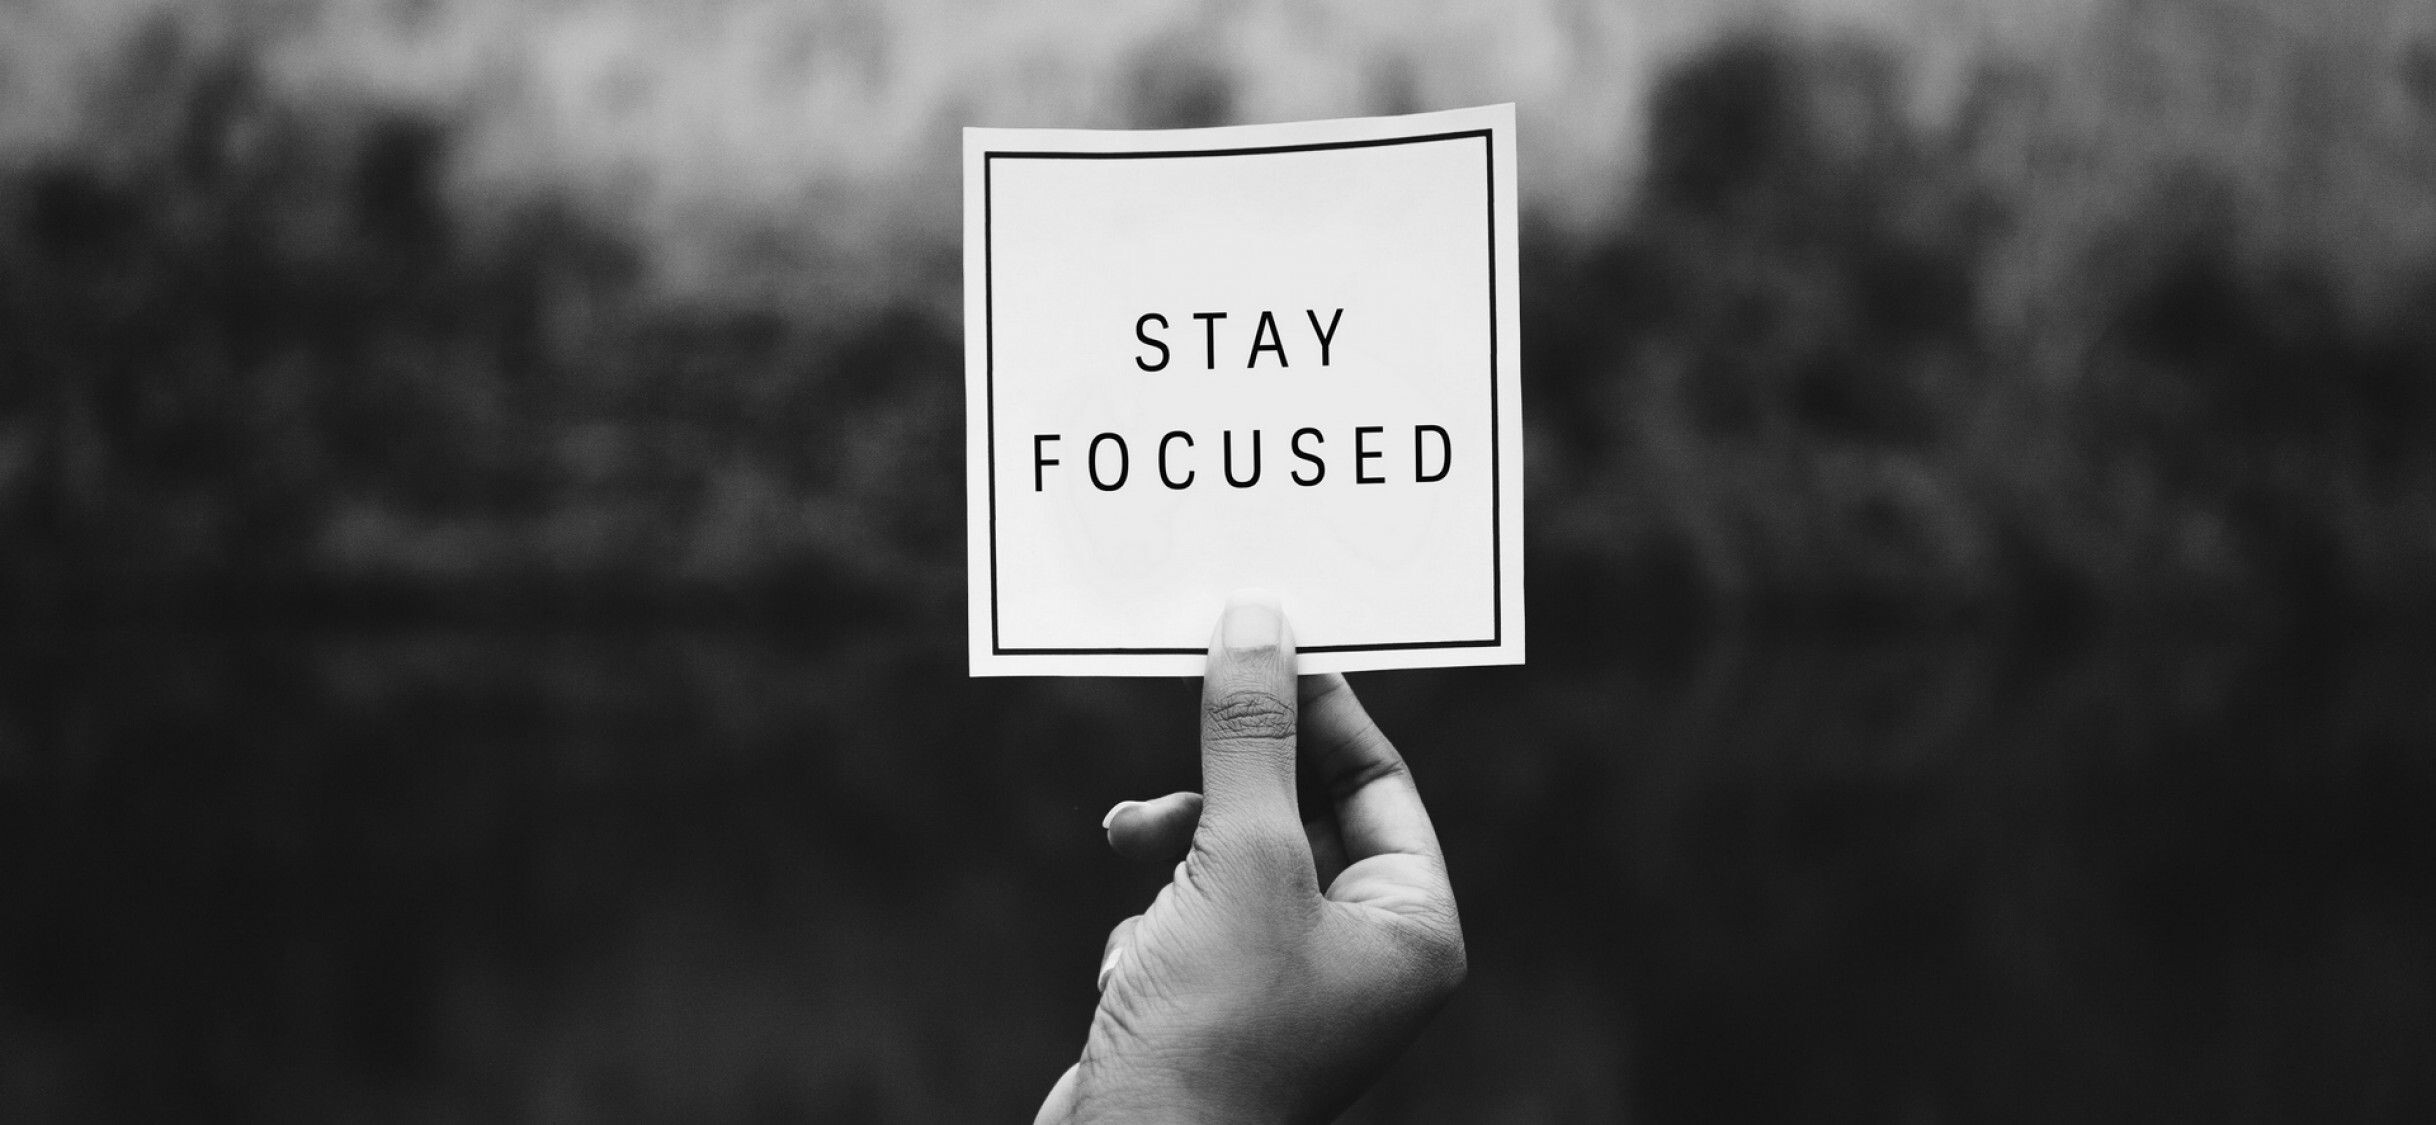 Goal (Aim): Stay focused, Monochrome, Inspirational phrases, Self motivation. 2440x1130 Dual Screen Background.